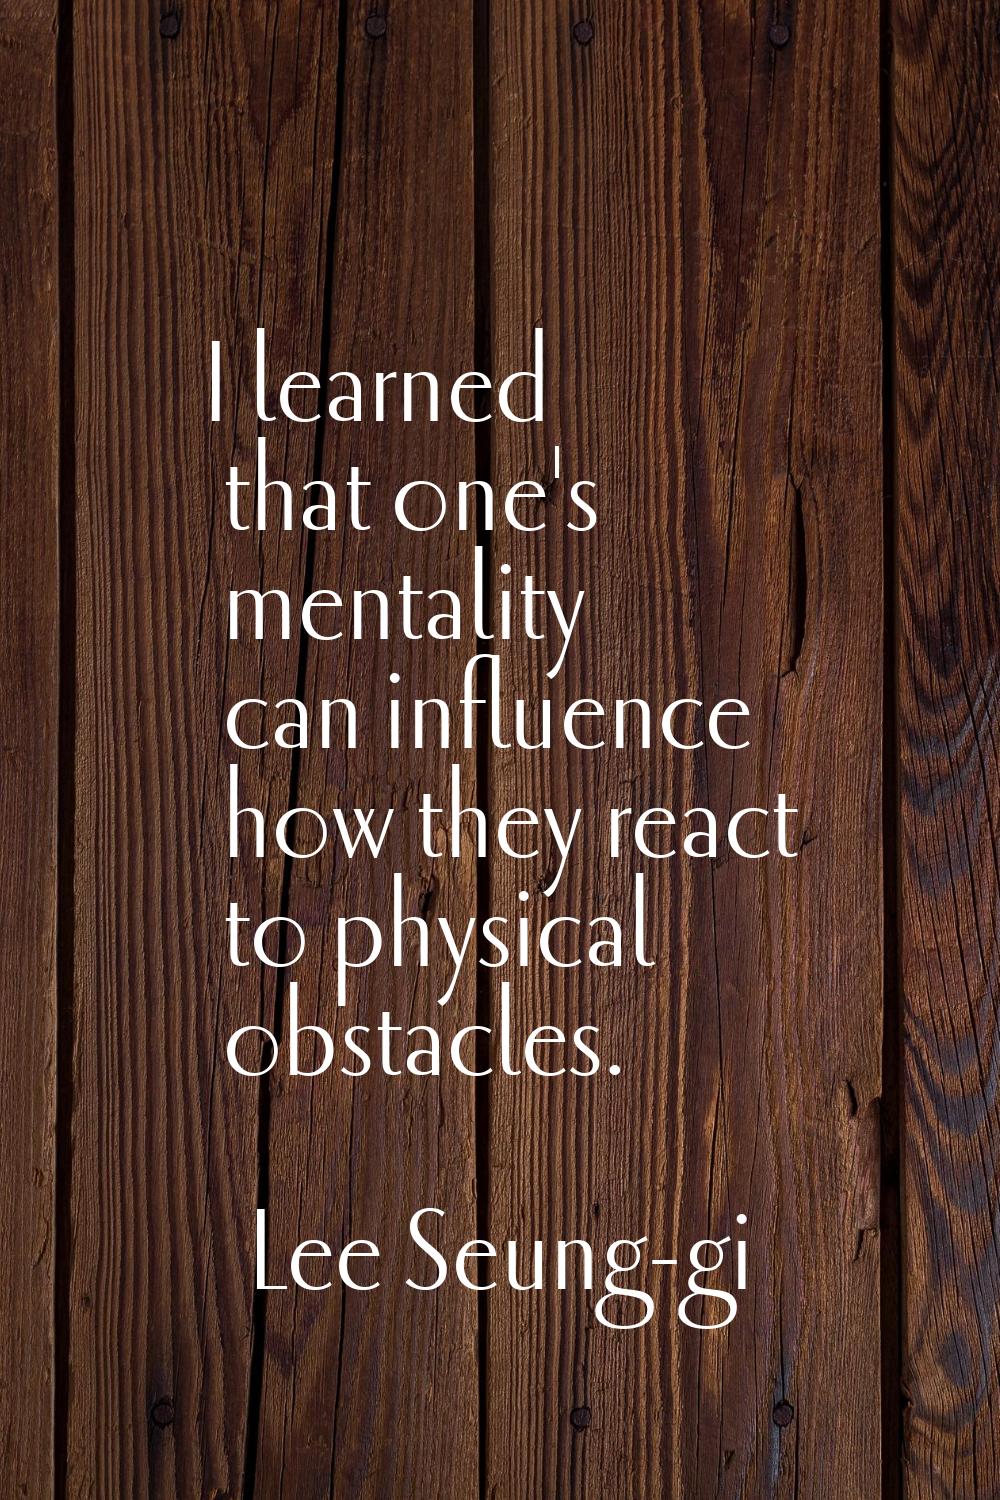 I learned that one's mentality can influence how they react to physical obstacles.